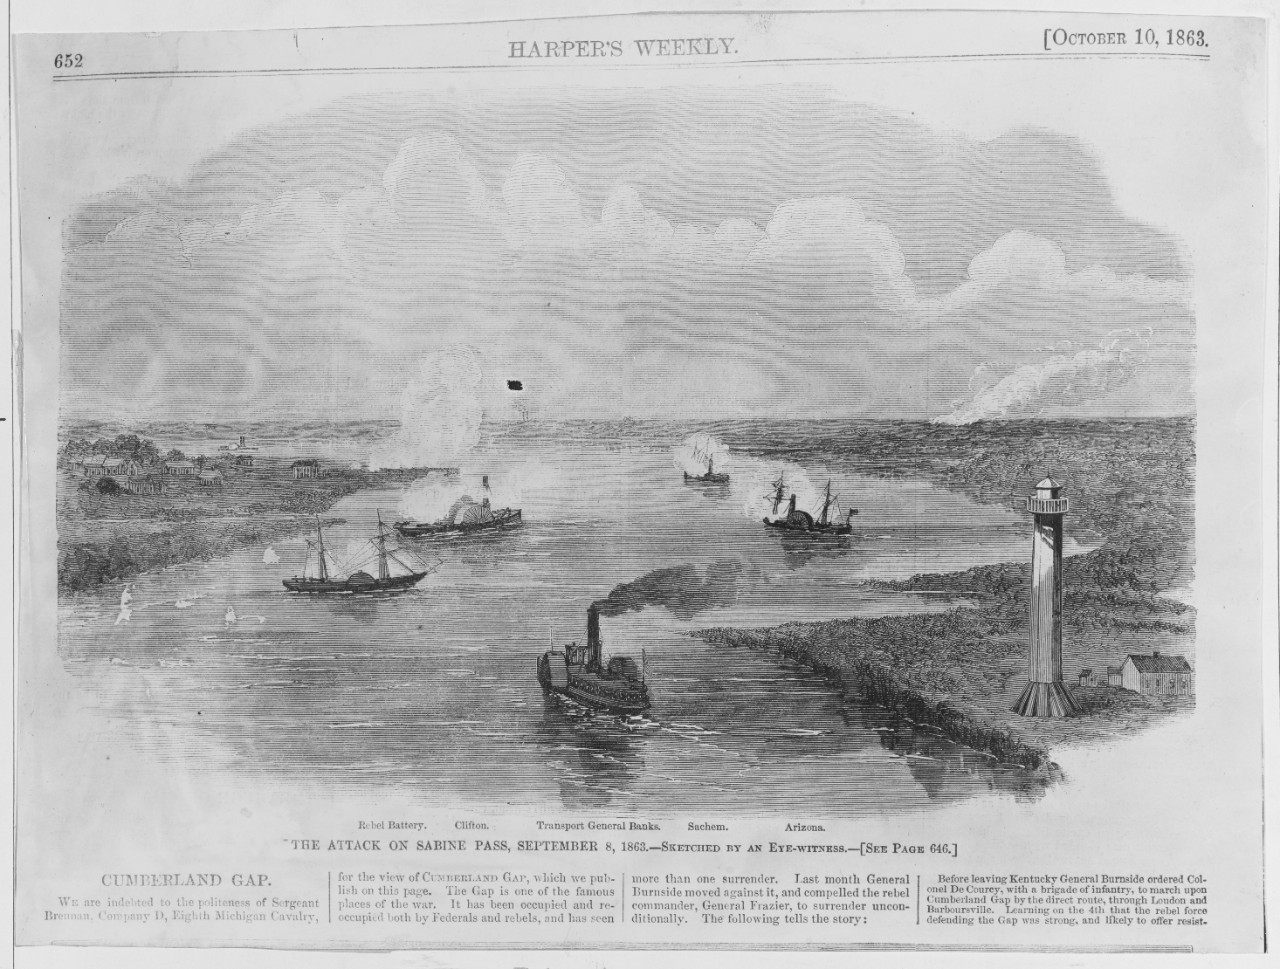 The Attack on Sabine Pass, September 8, 1863. Sketched by an Eye-Witness. Harper's Weekly, October 11, 1862. (USN 903260)